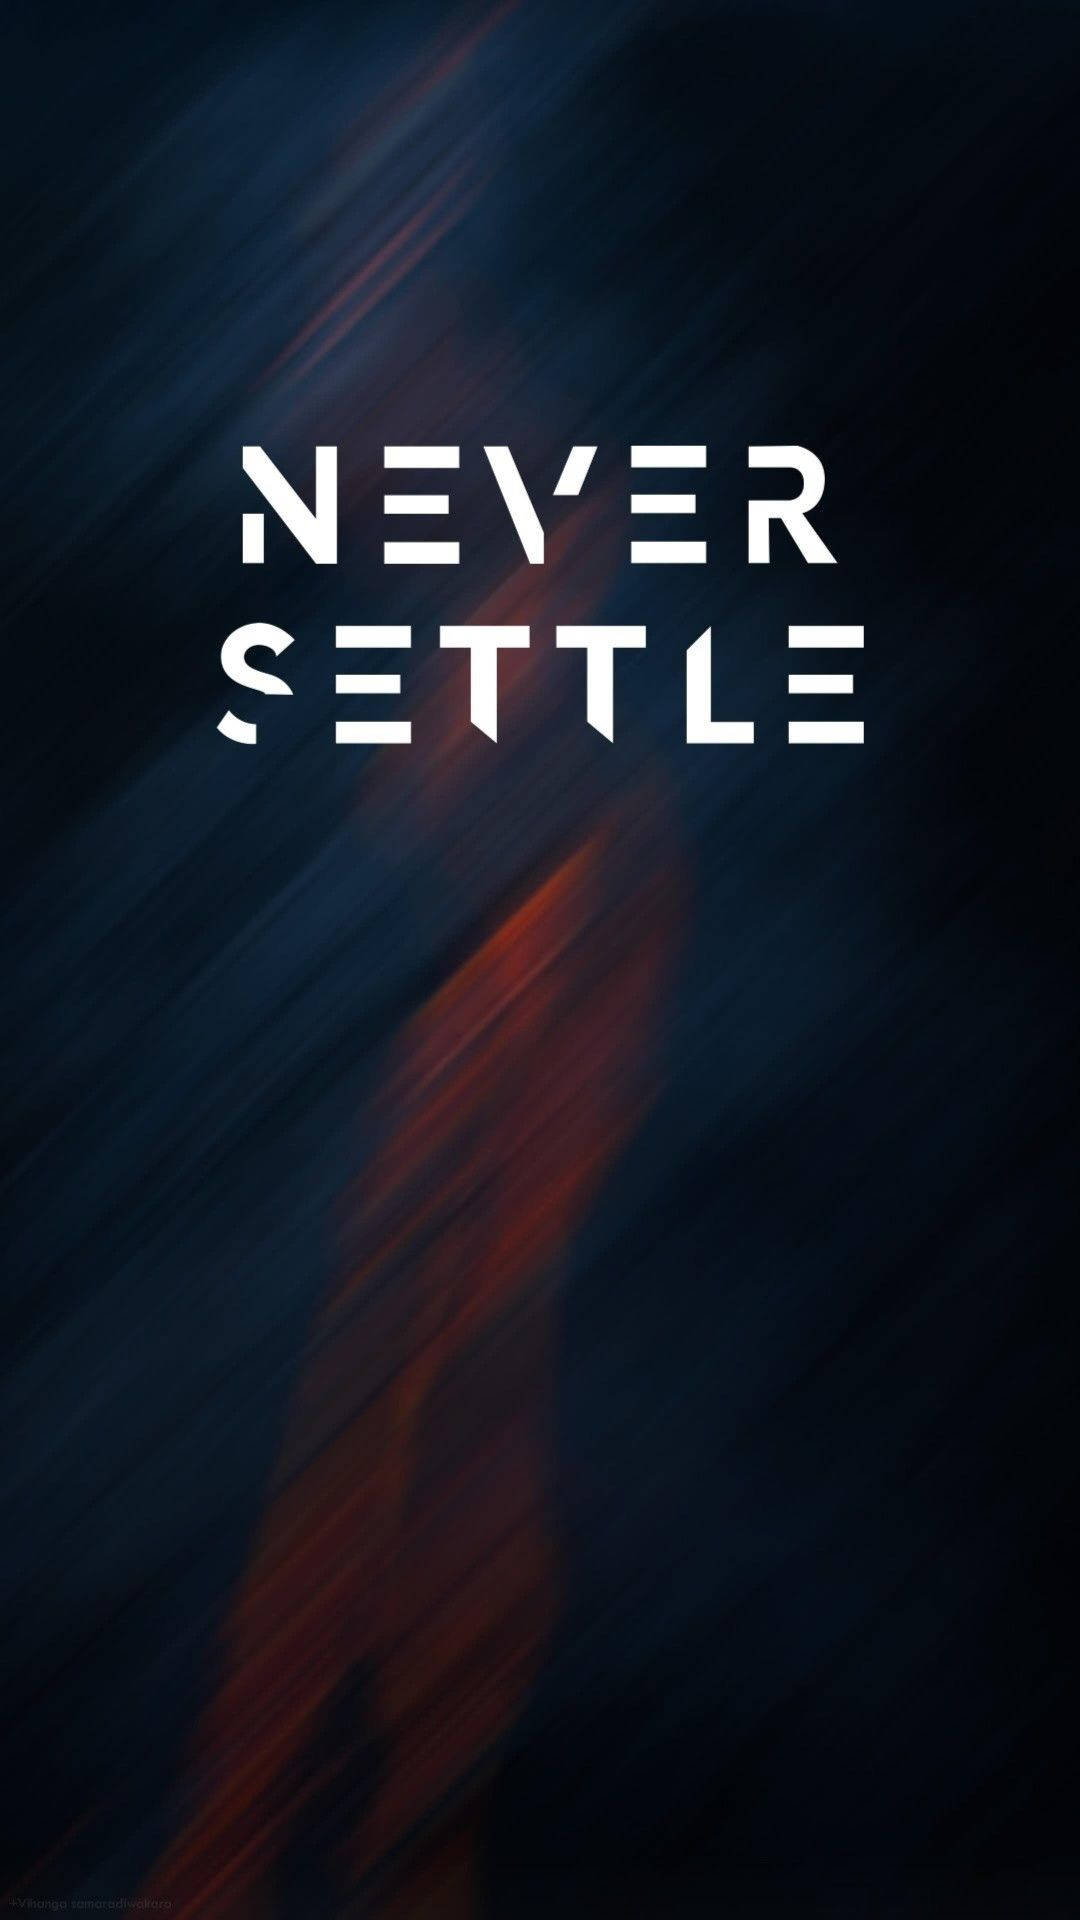 Never Settle Motivational Quotes Iphone Wallpaper